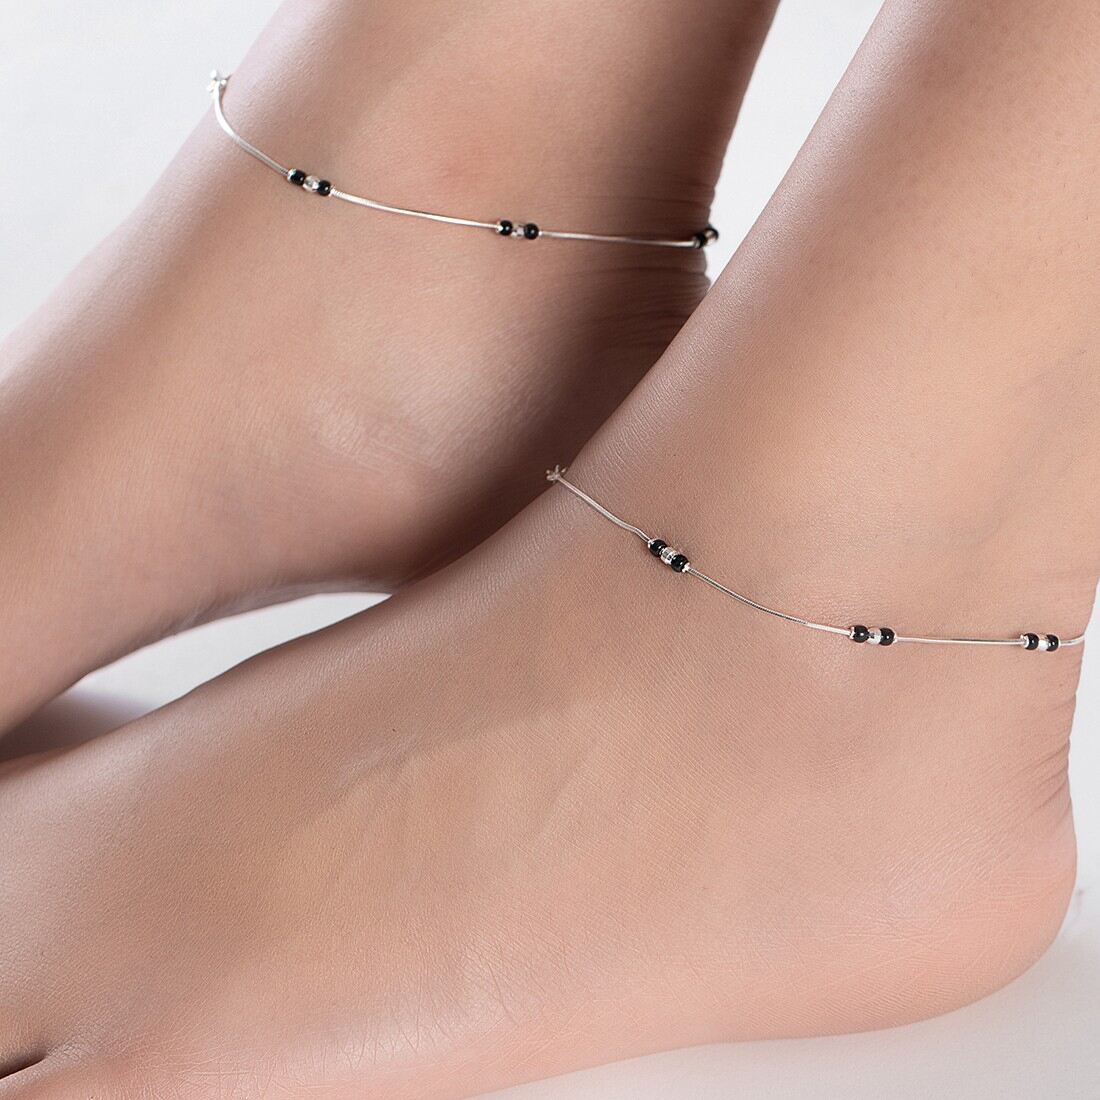 Shimmering Harmony: Rhodium-Plated Sterling Silver Anklet with Beaded Accents